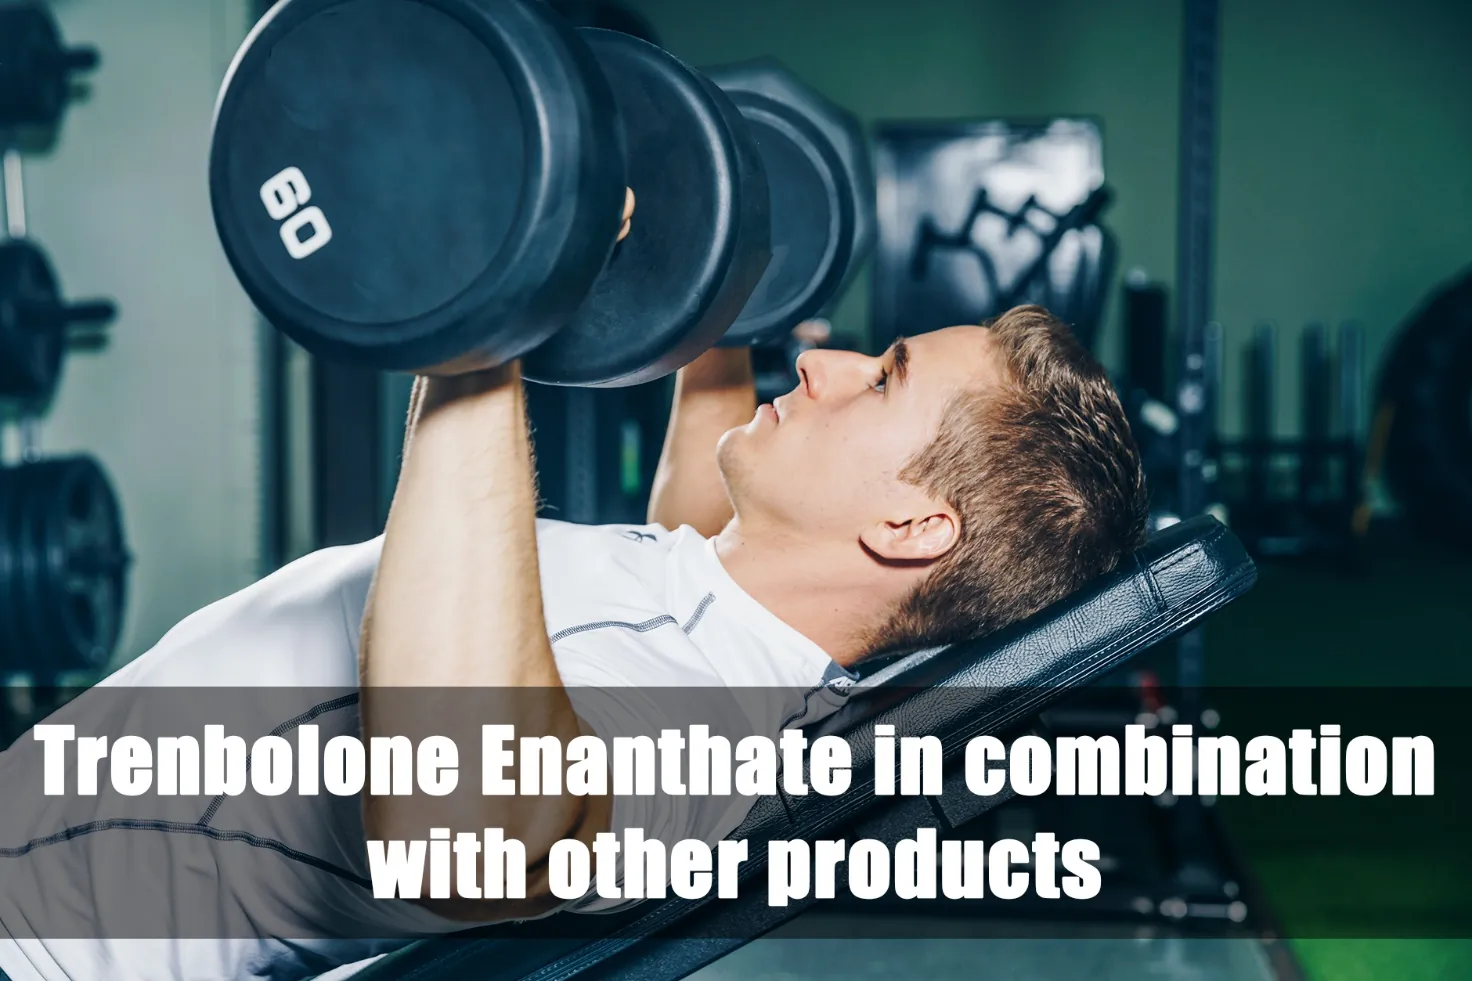 Trenbolone Enanthate with other products